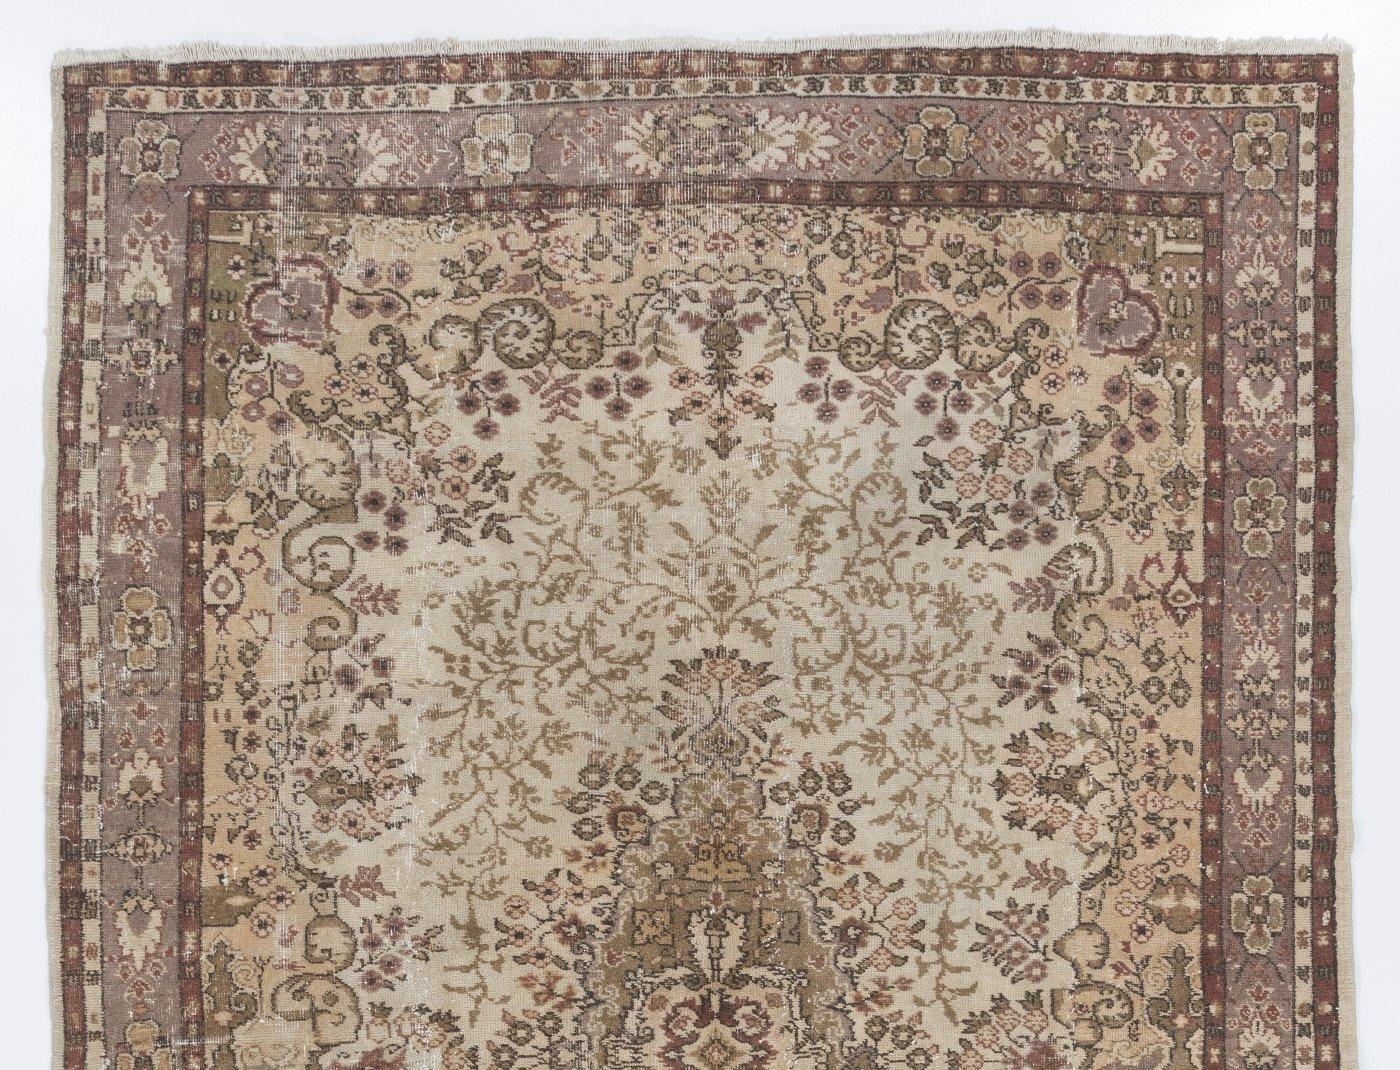 A finely hand-knotted vintage Turkish carpet from 1950s featuring an elegant medallion design in beige, brown and green. The rug has even low wool pile on cotton foundation. It is heavy and lays flat on the floor, in very good condition with no